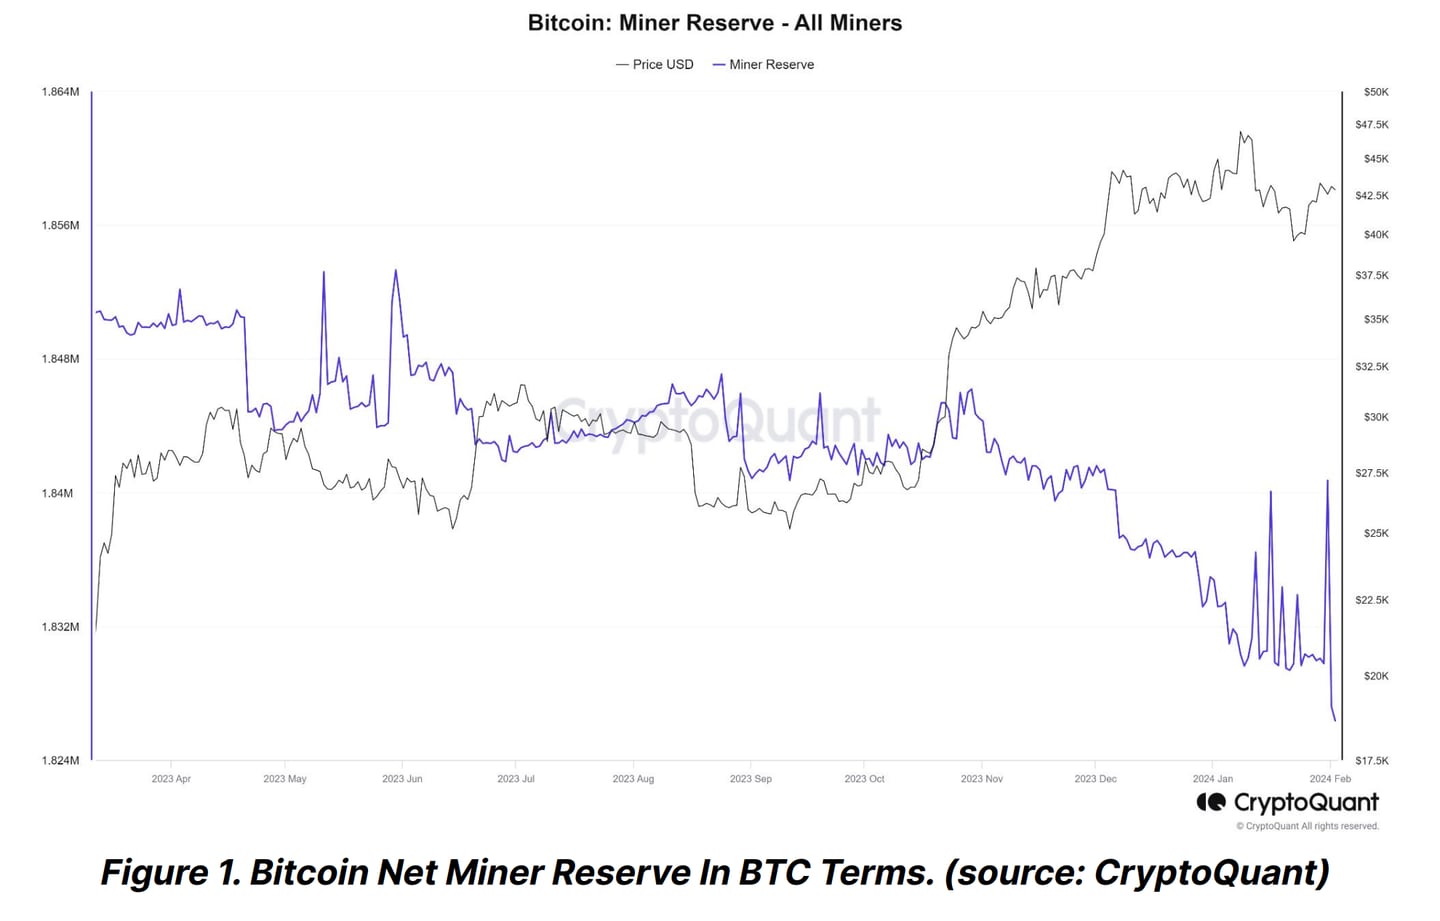 Bitcoin Net Miner Reserve In BTC Terms (Source CryptoQuant)